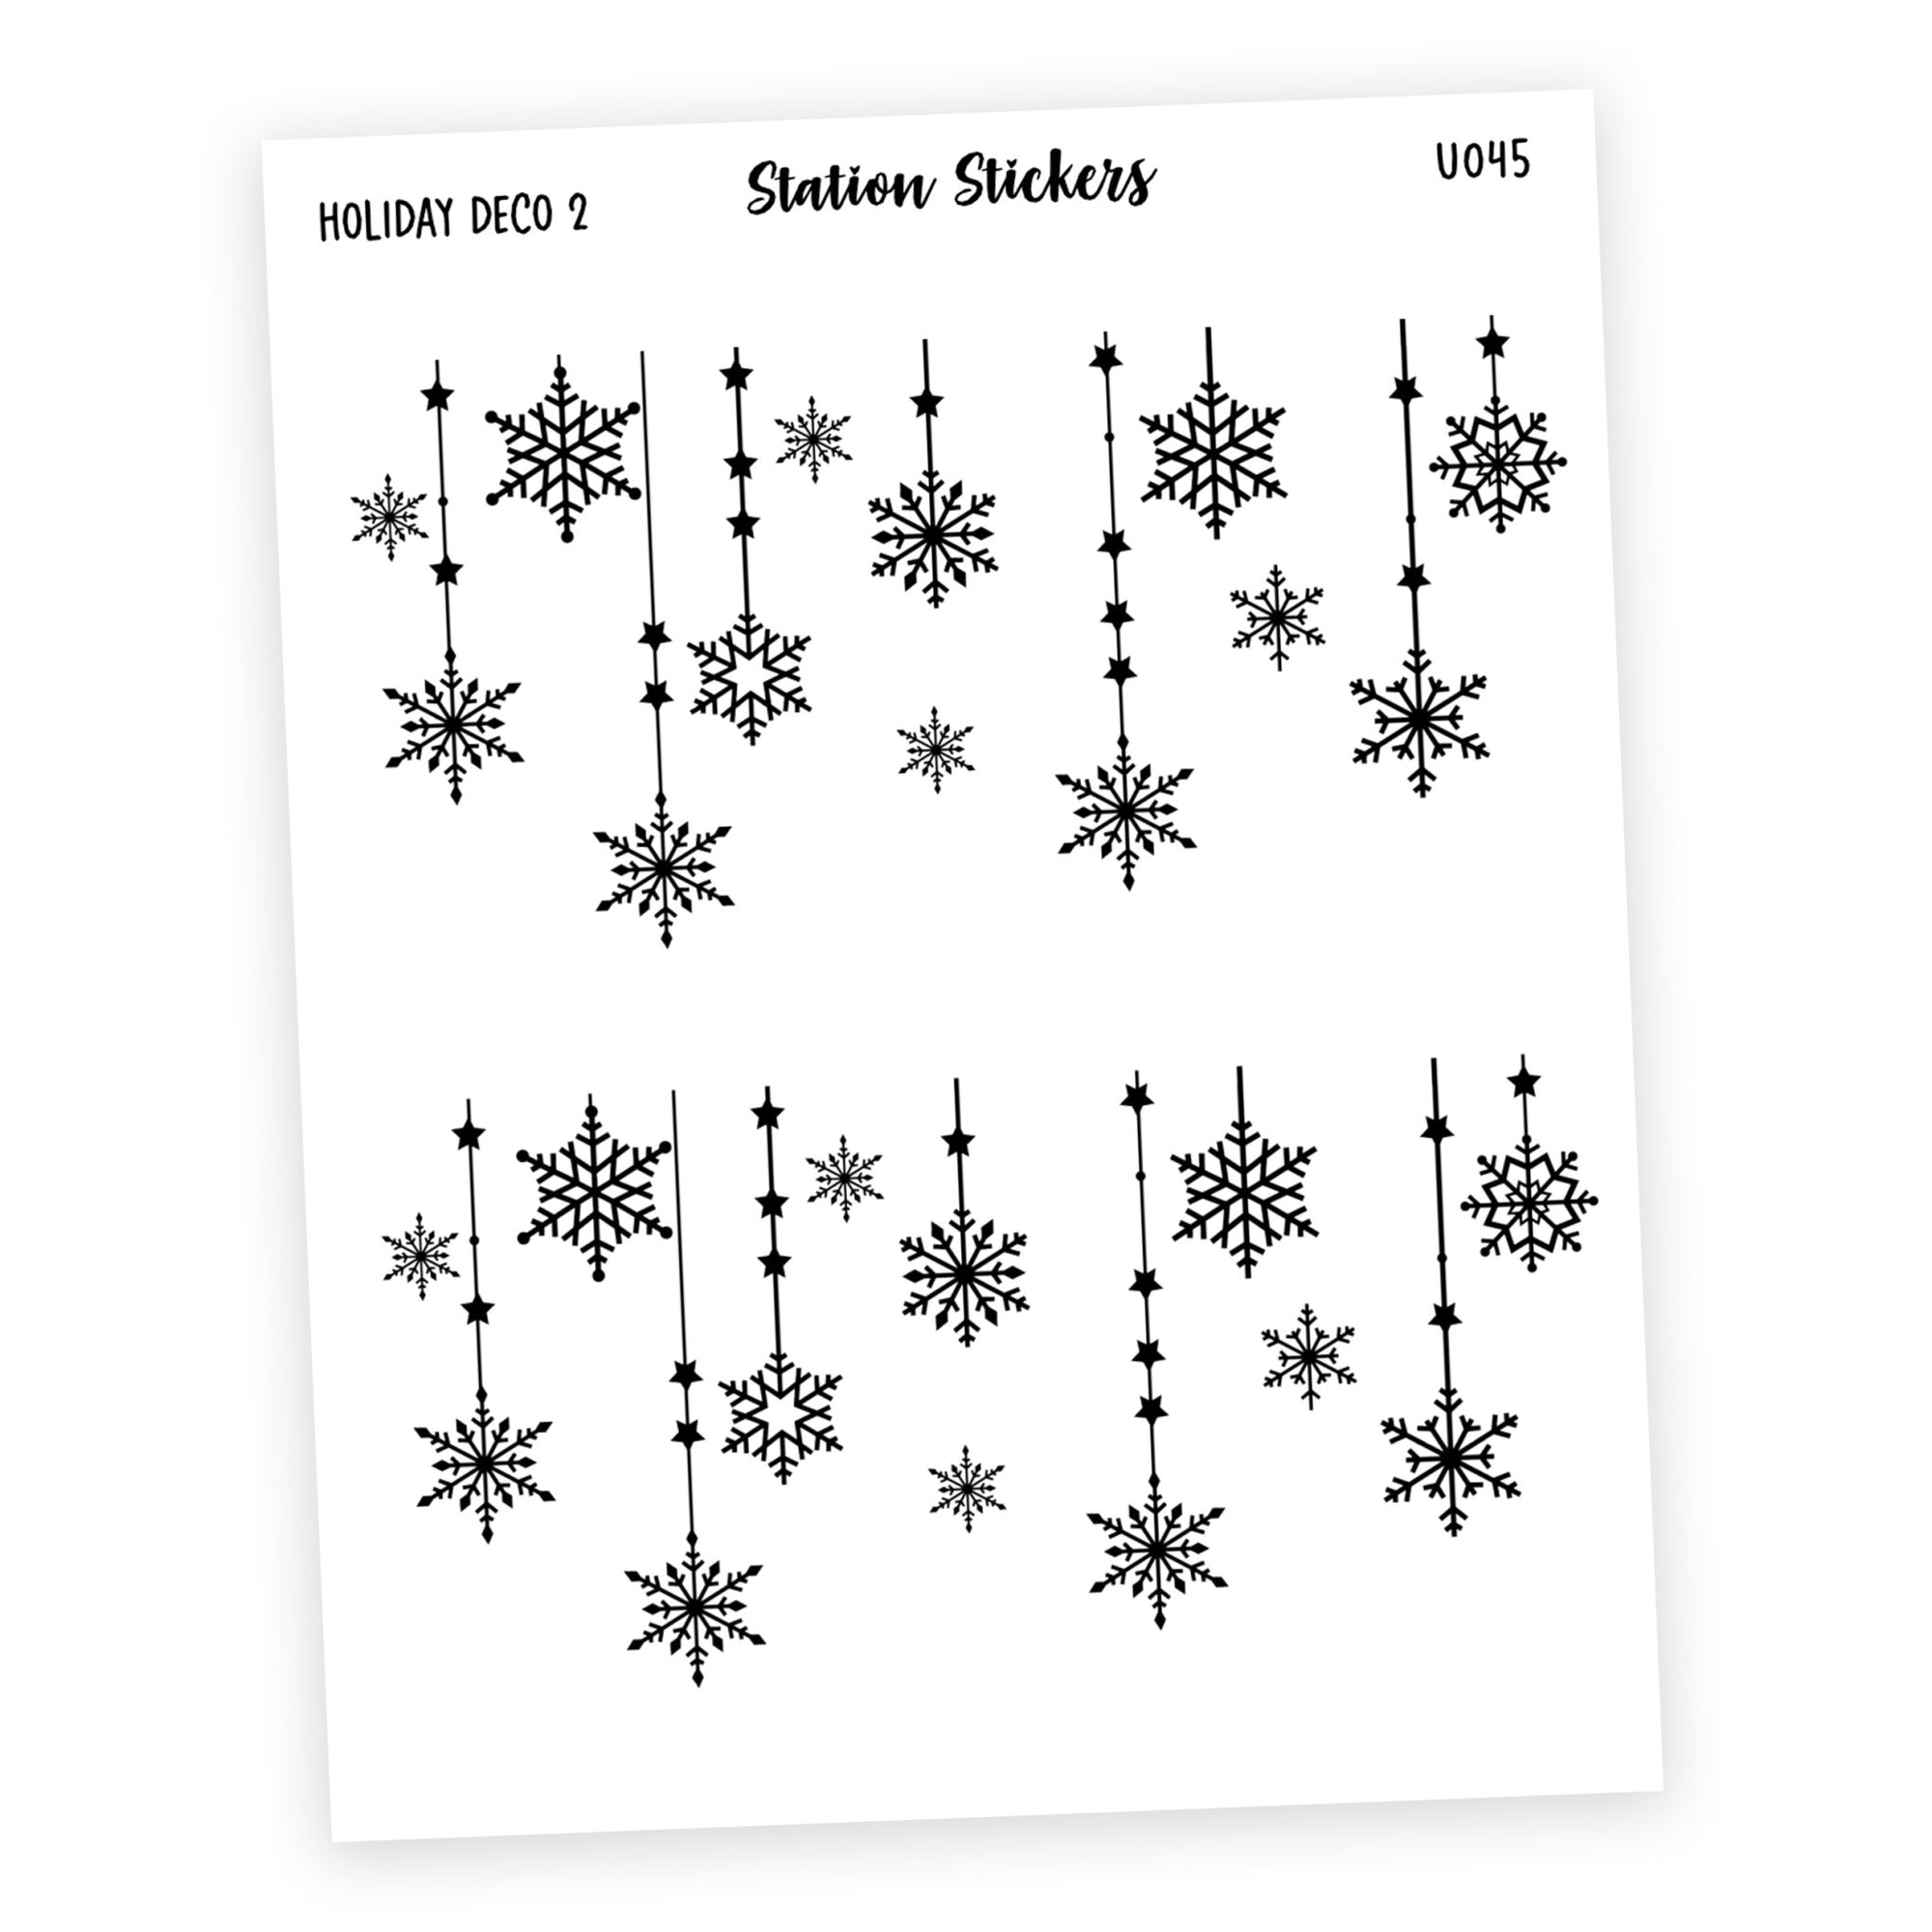 DECO • HOLIDAY 2 - Station Stickers